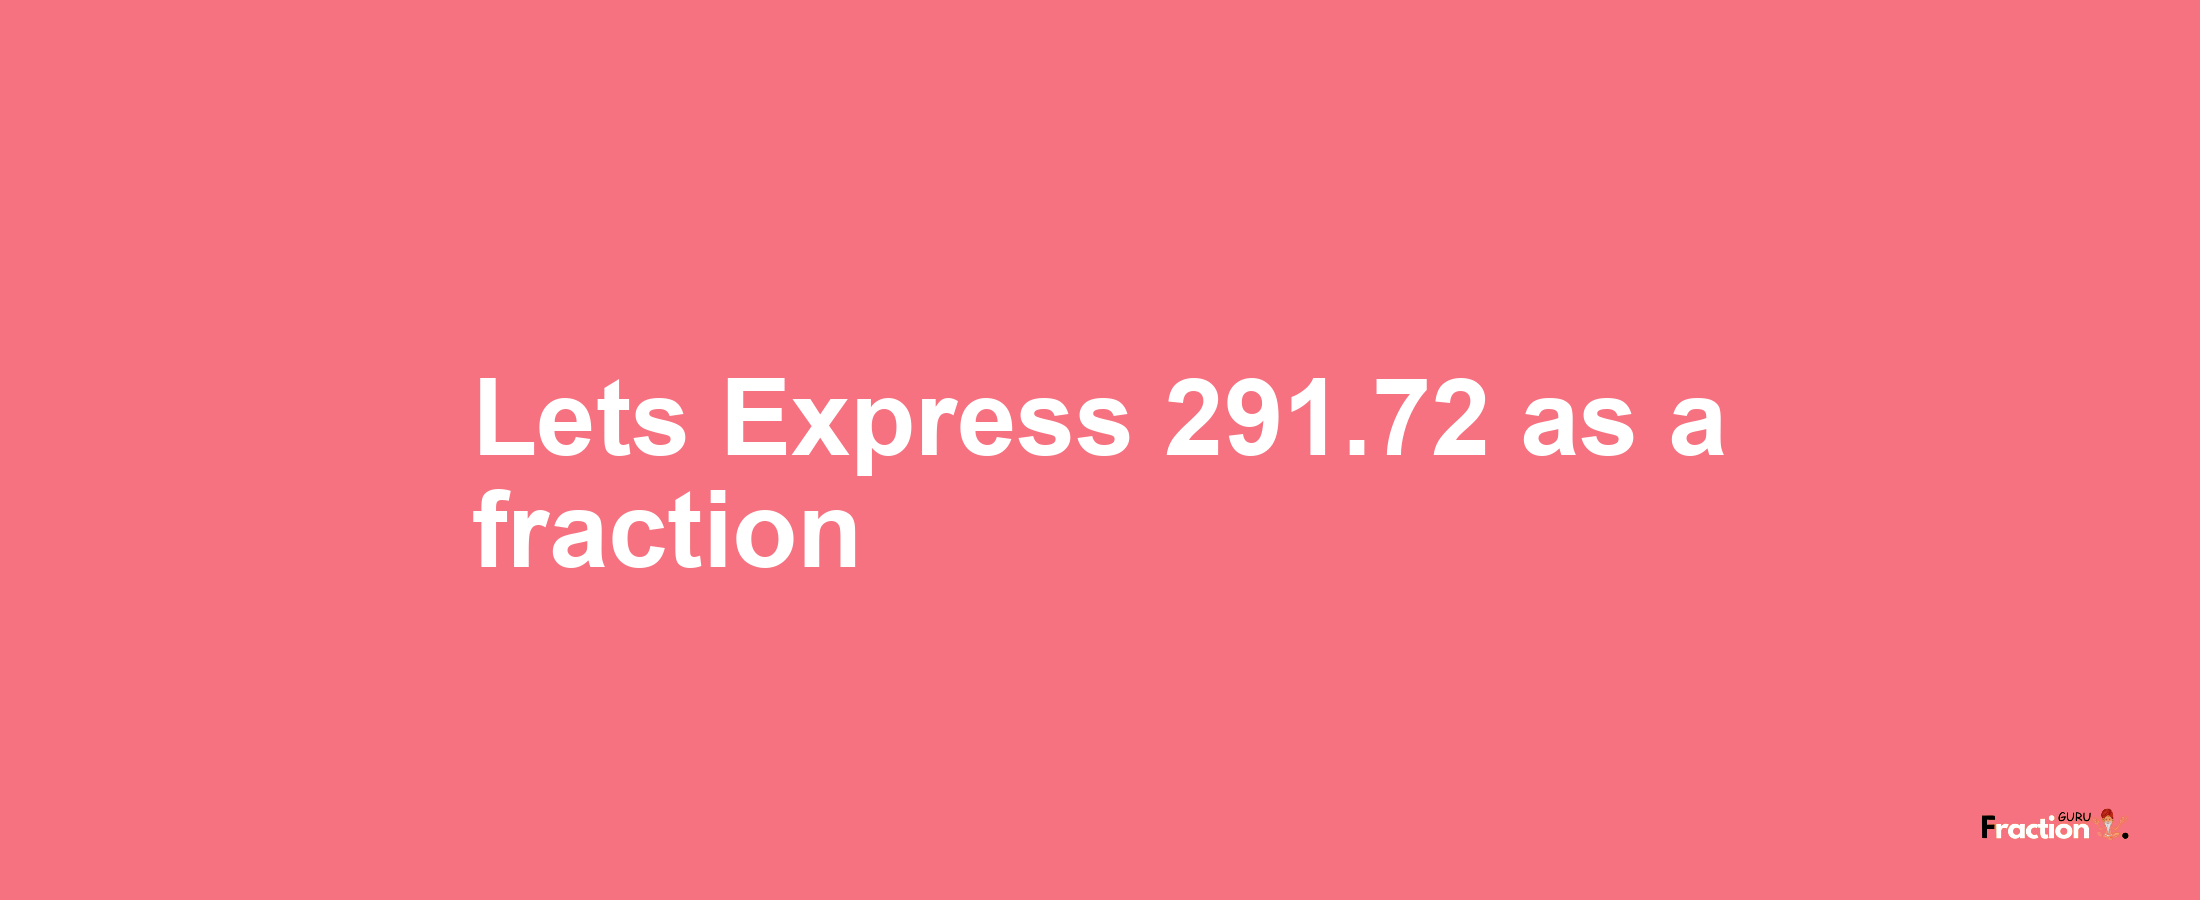 Lets Express 291.72 as afraction